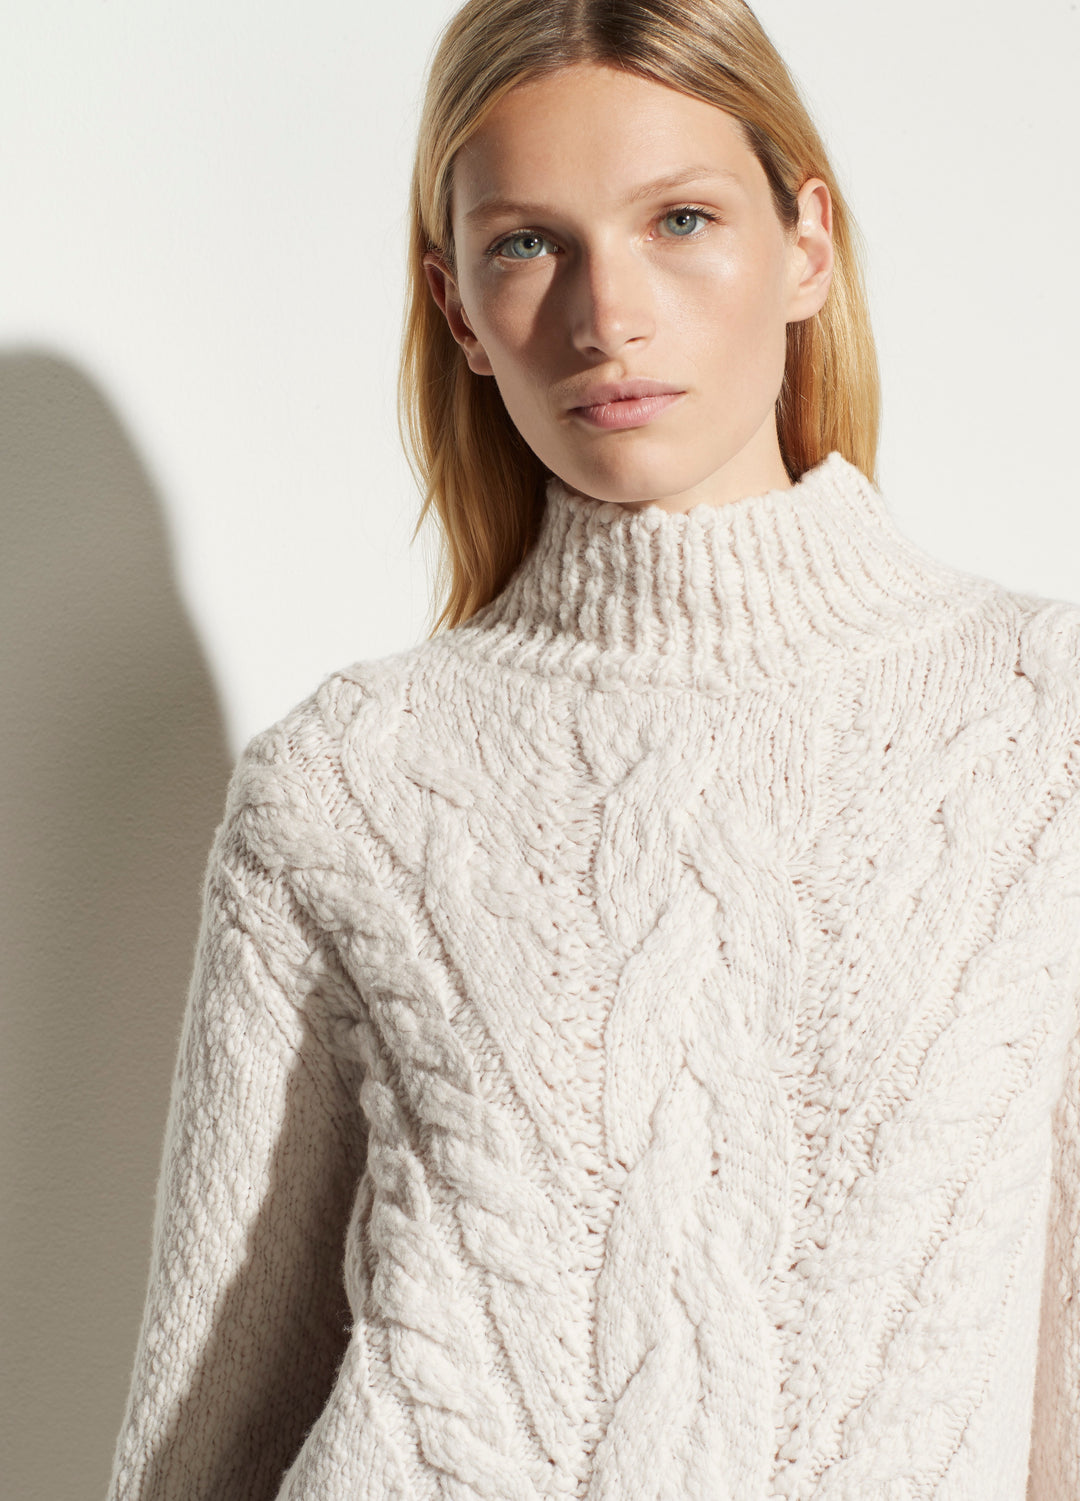 Vince - Rising Cable Turtleneck in Cream